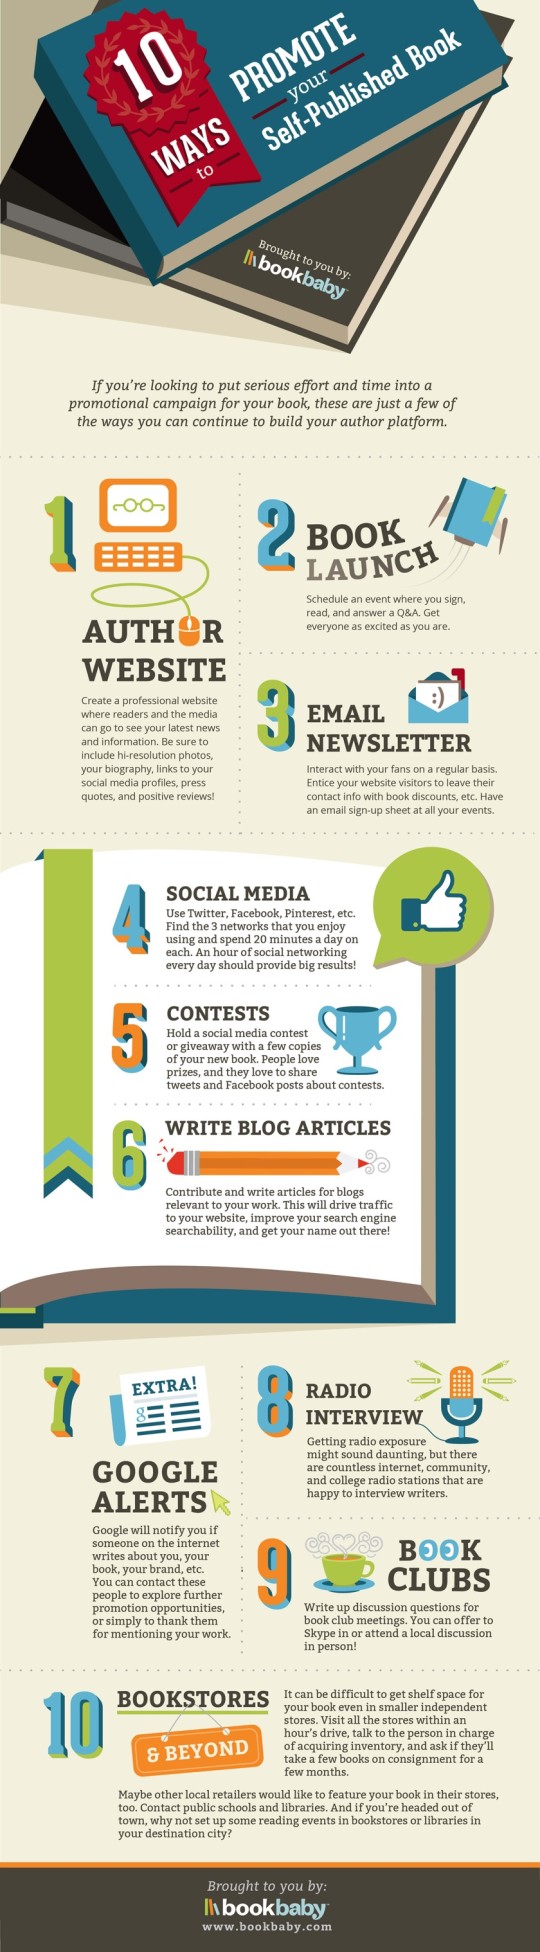 10 ways to promote a self-published book #infographic